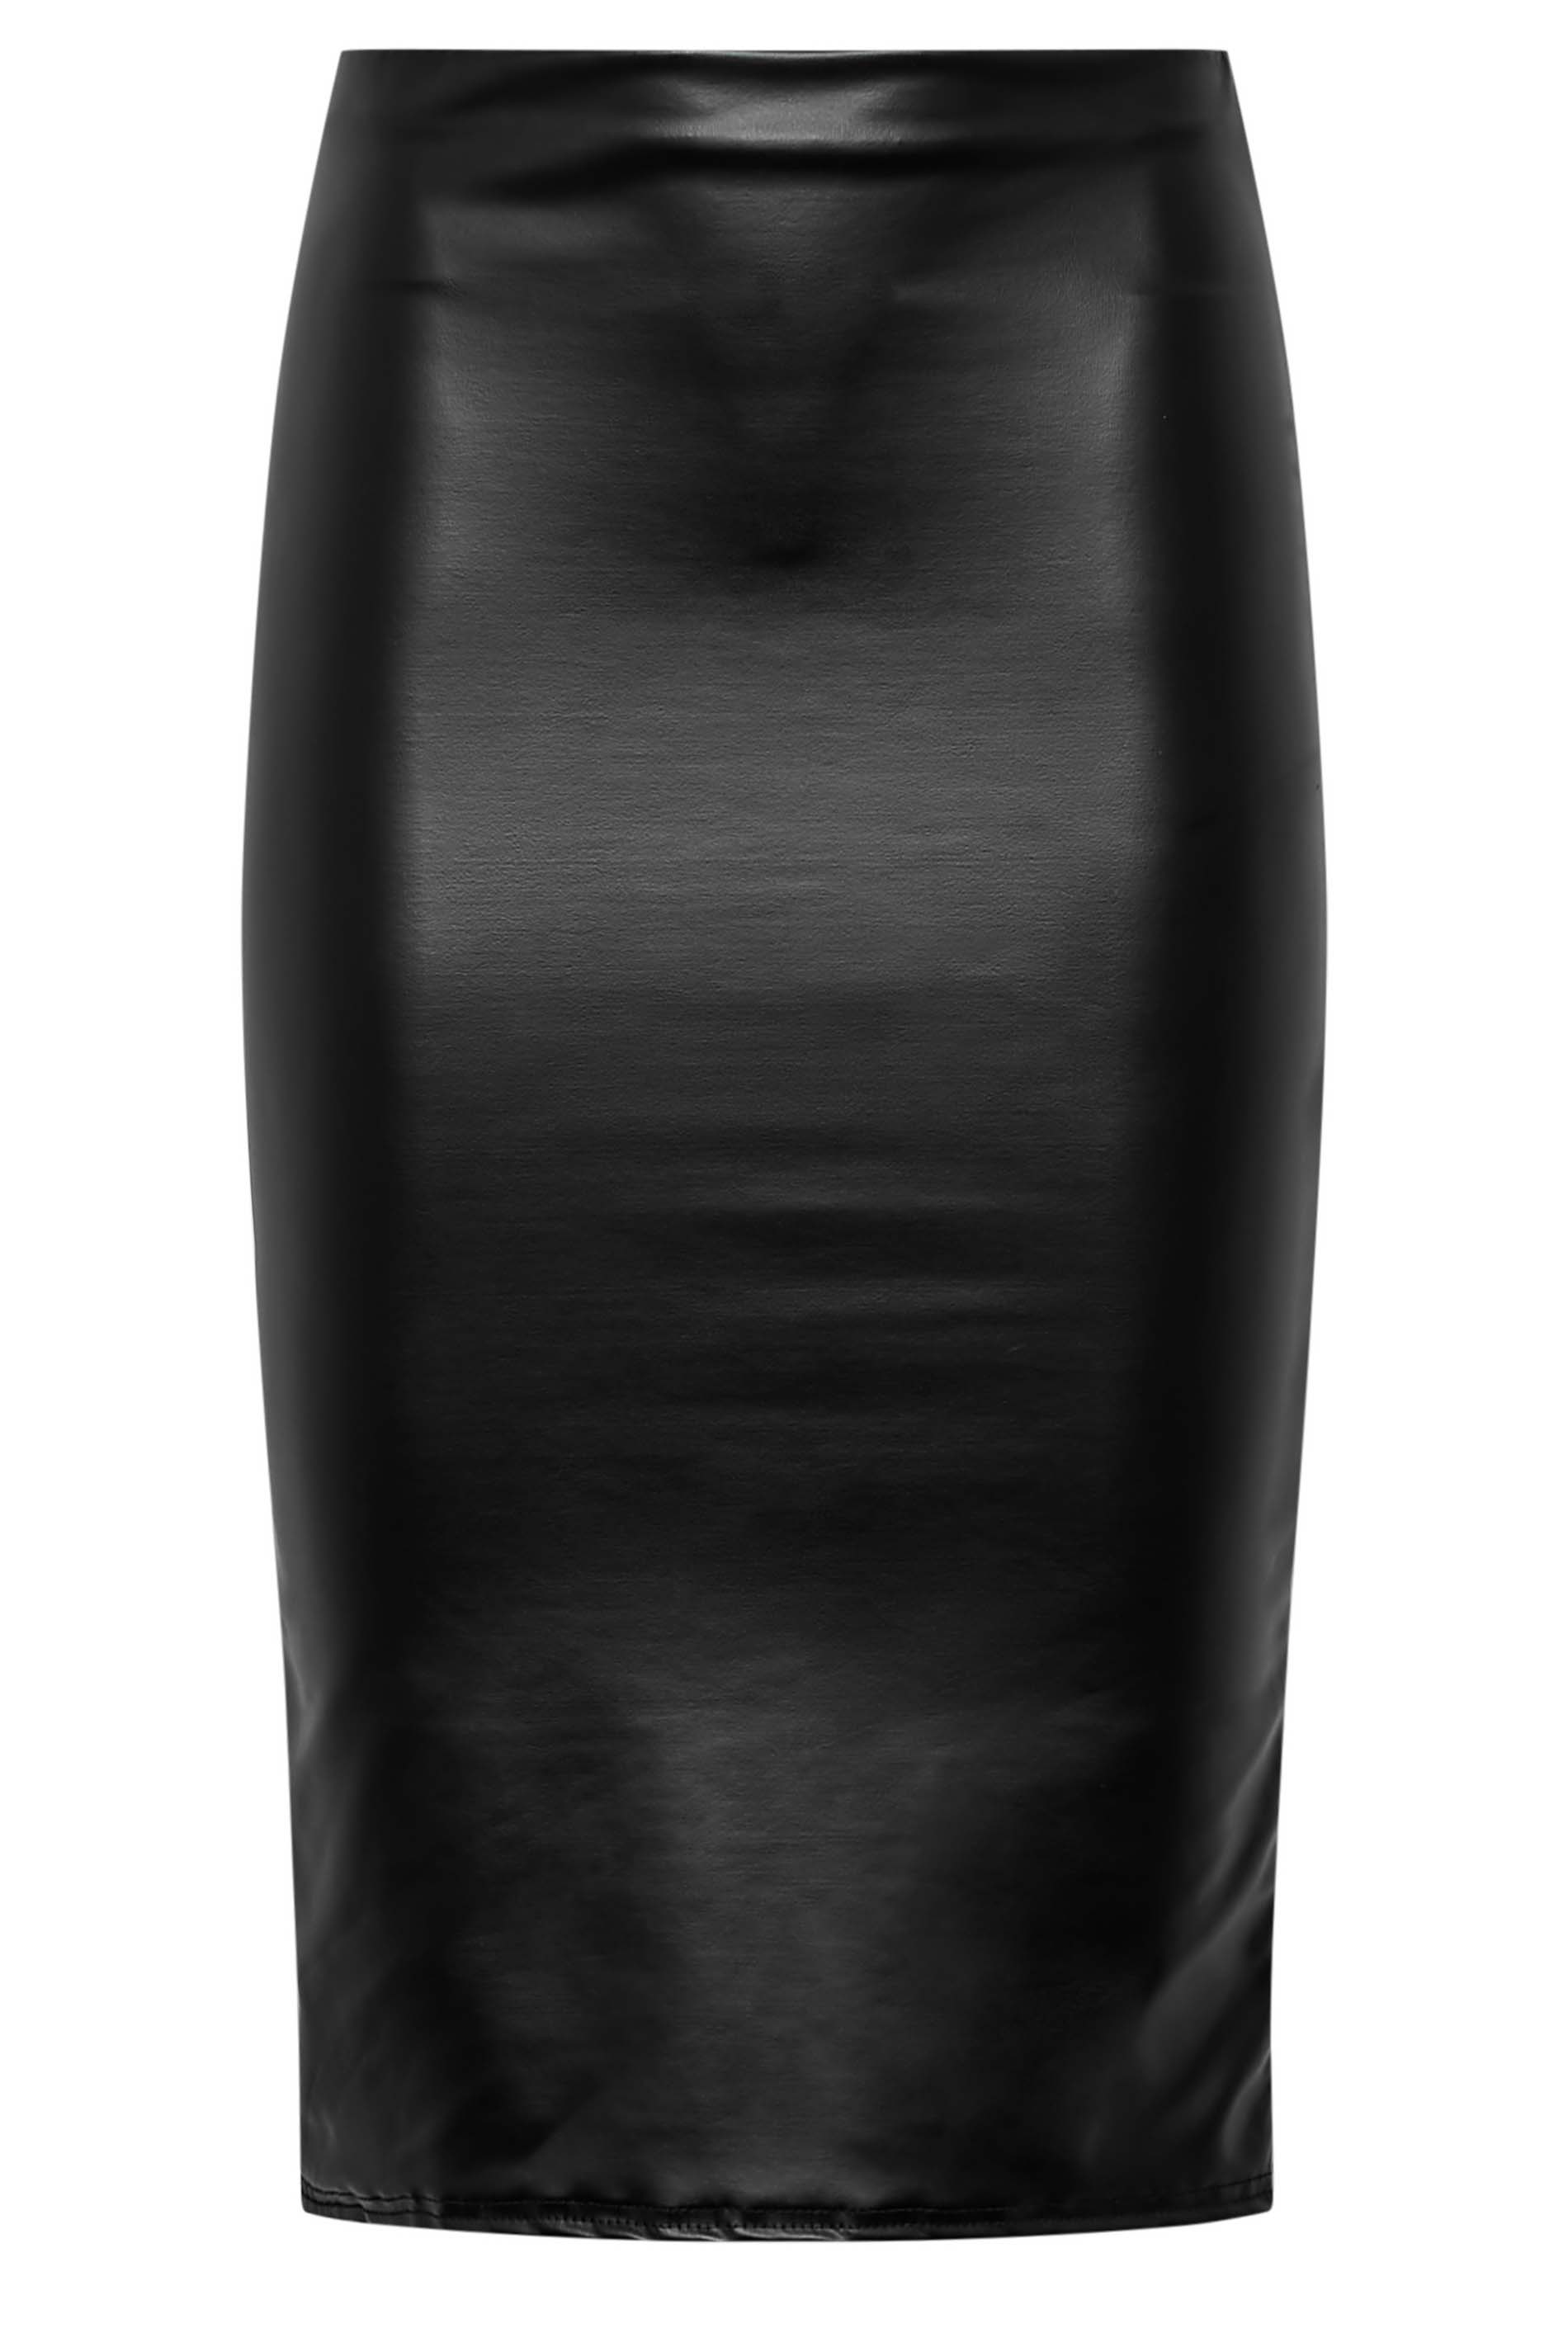 LTS Tall Women's Black Faux Leather Pencil Skirt | Long Tall Sally 2